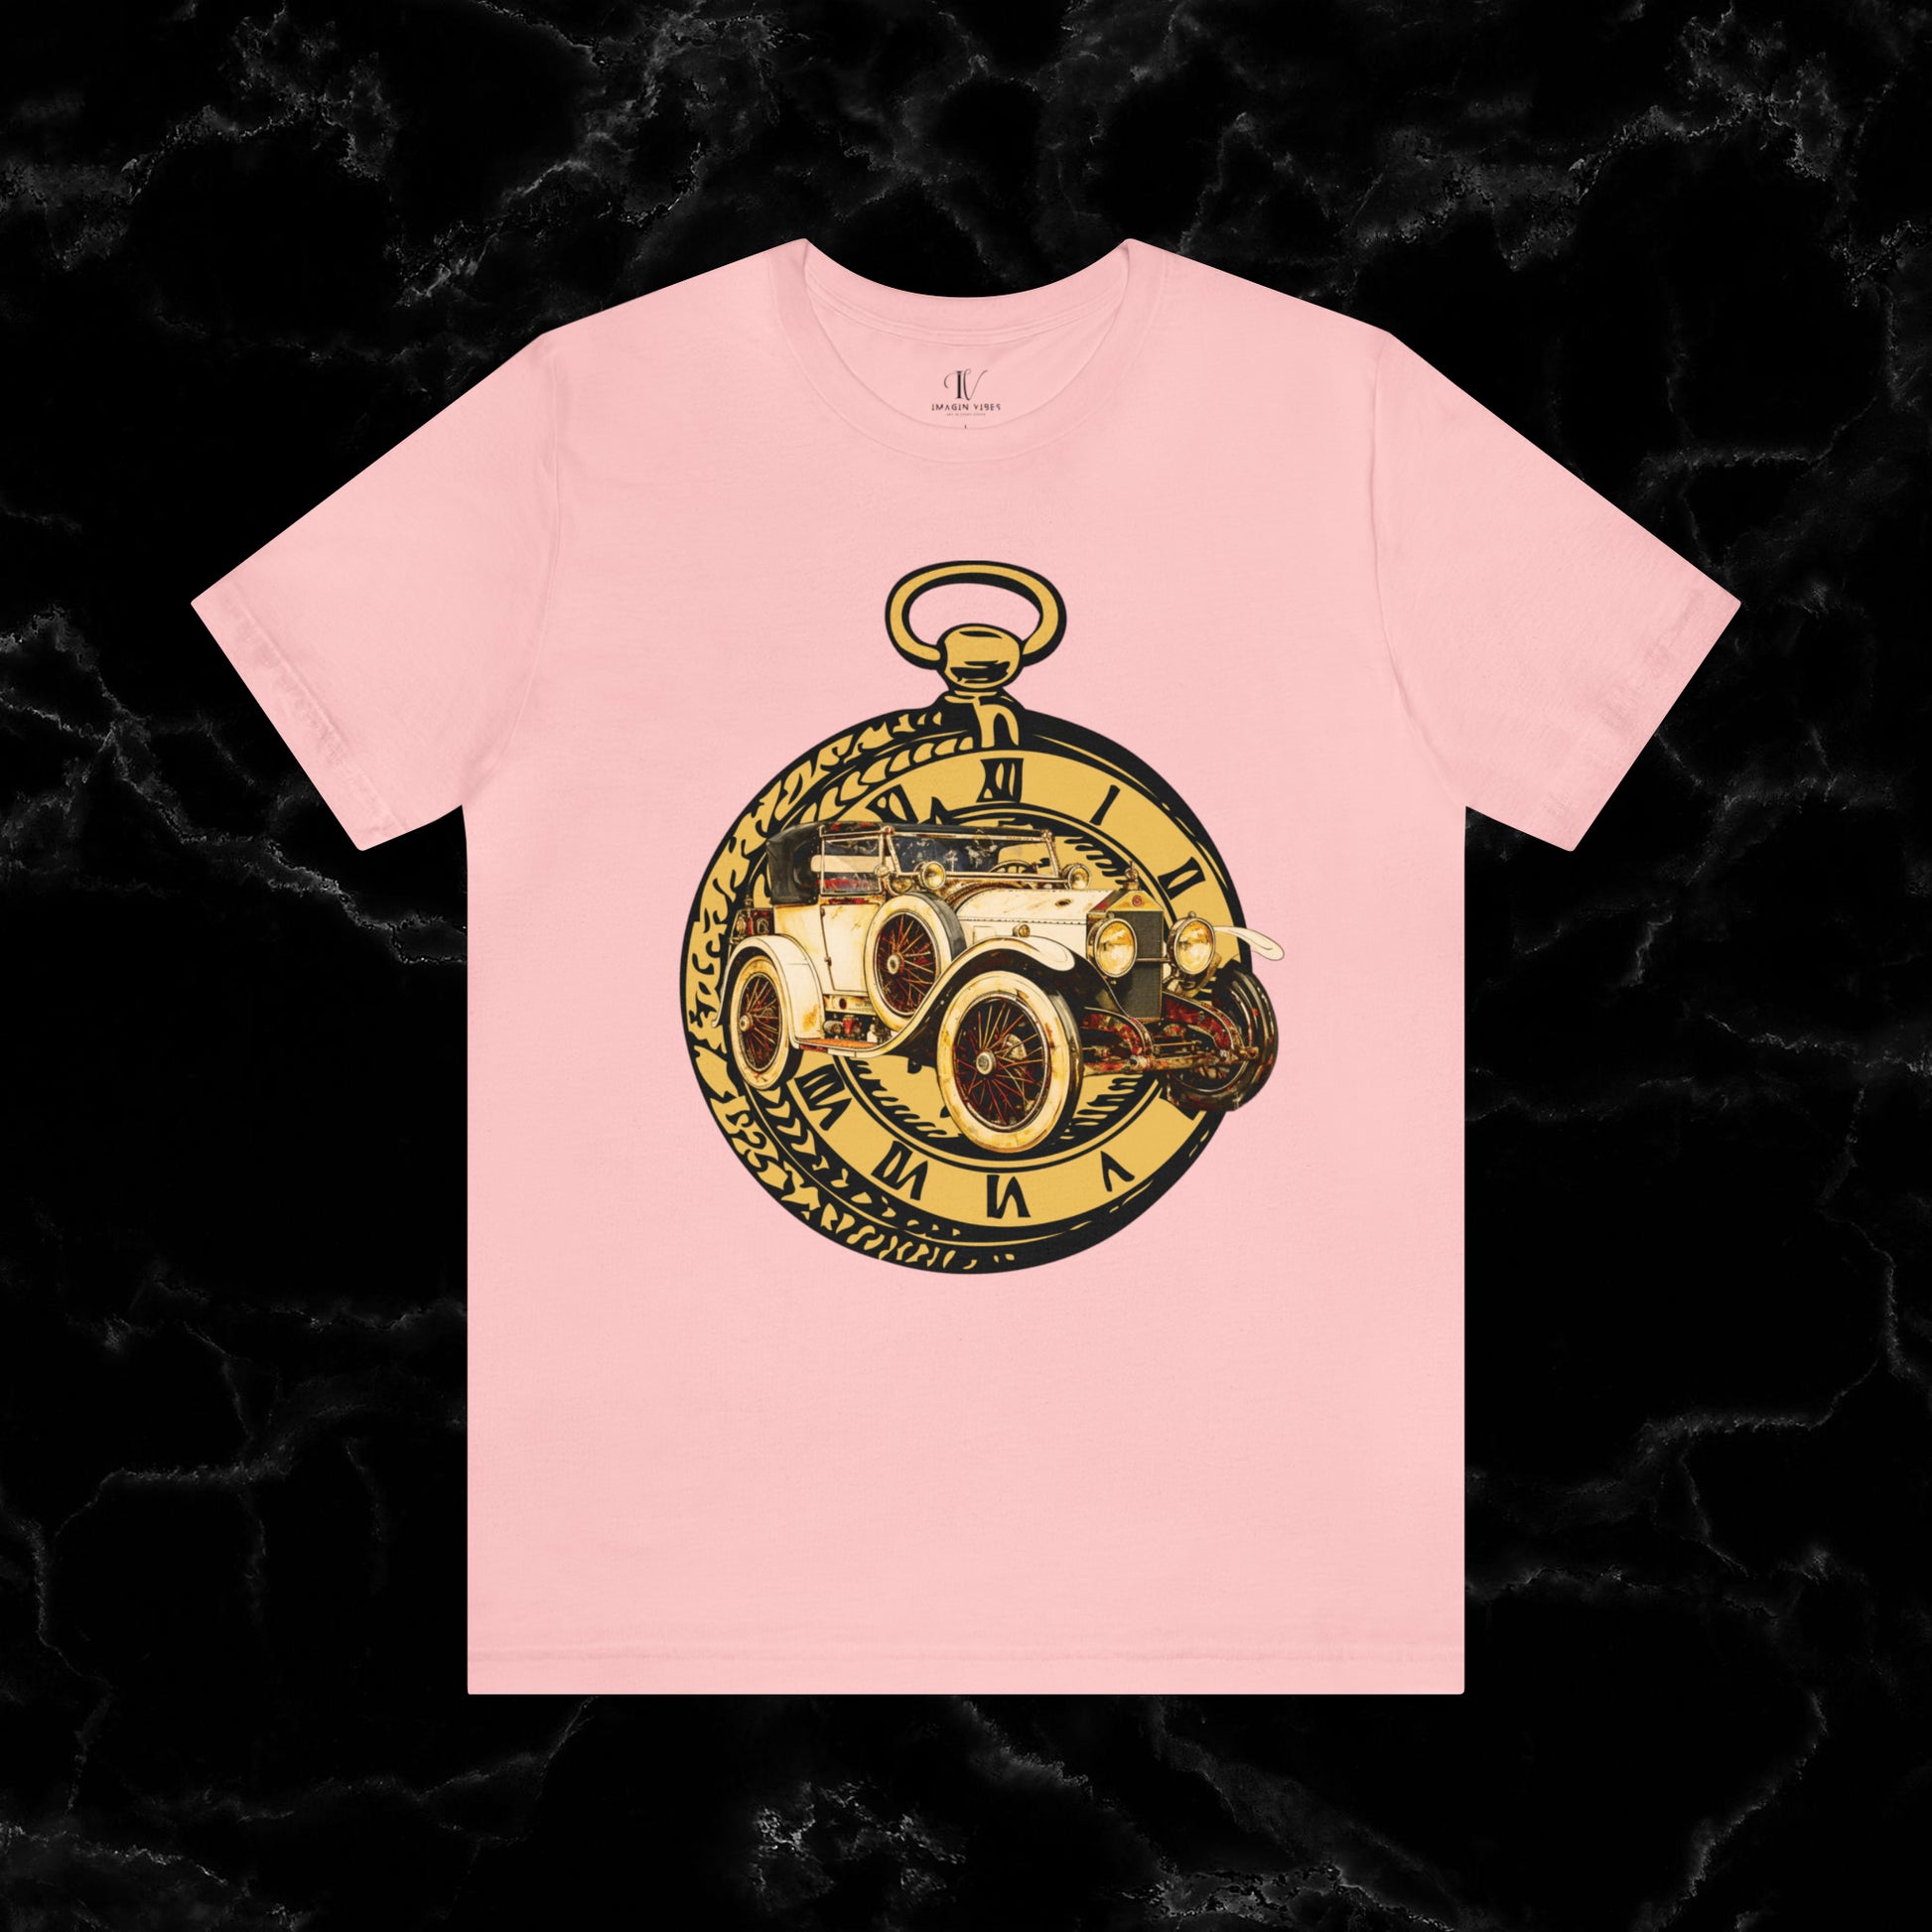 Ride in Style: Vintage Car Enthusiast T-Shirt with Classic Wheels and Timeless Appeal T-Shirt Pink S 